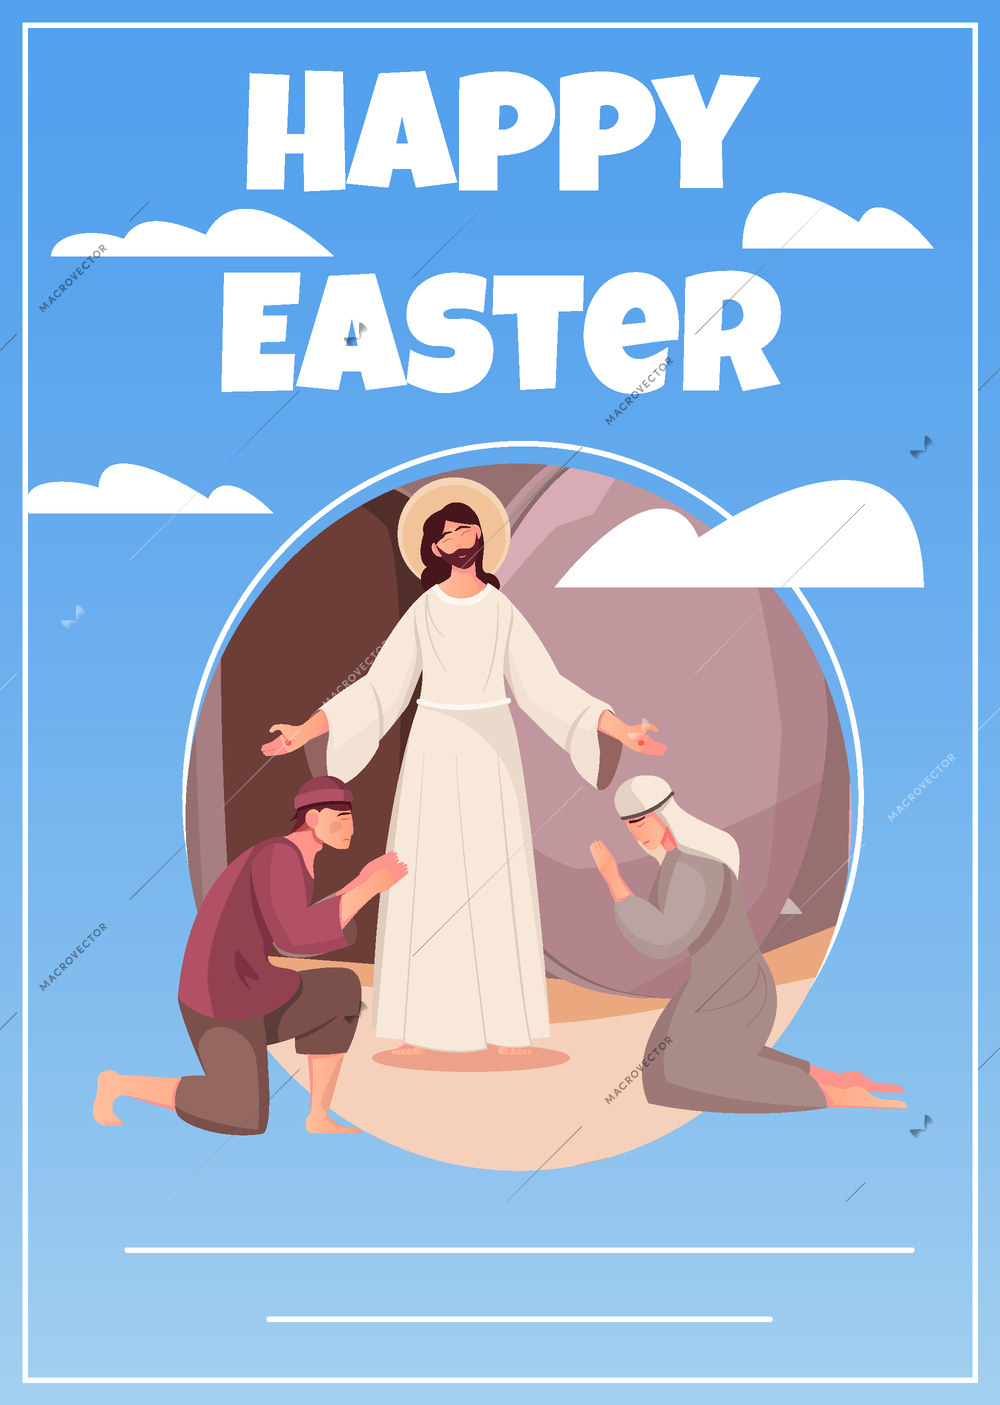 Happy easter flat greeting card with jesus christ and praying people vector illustration